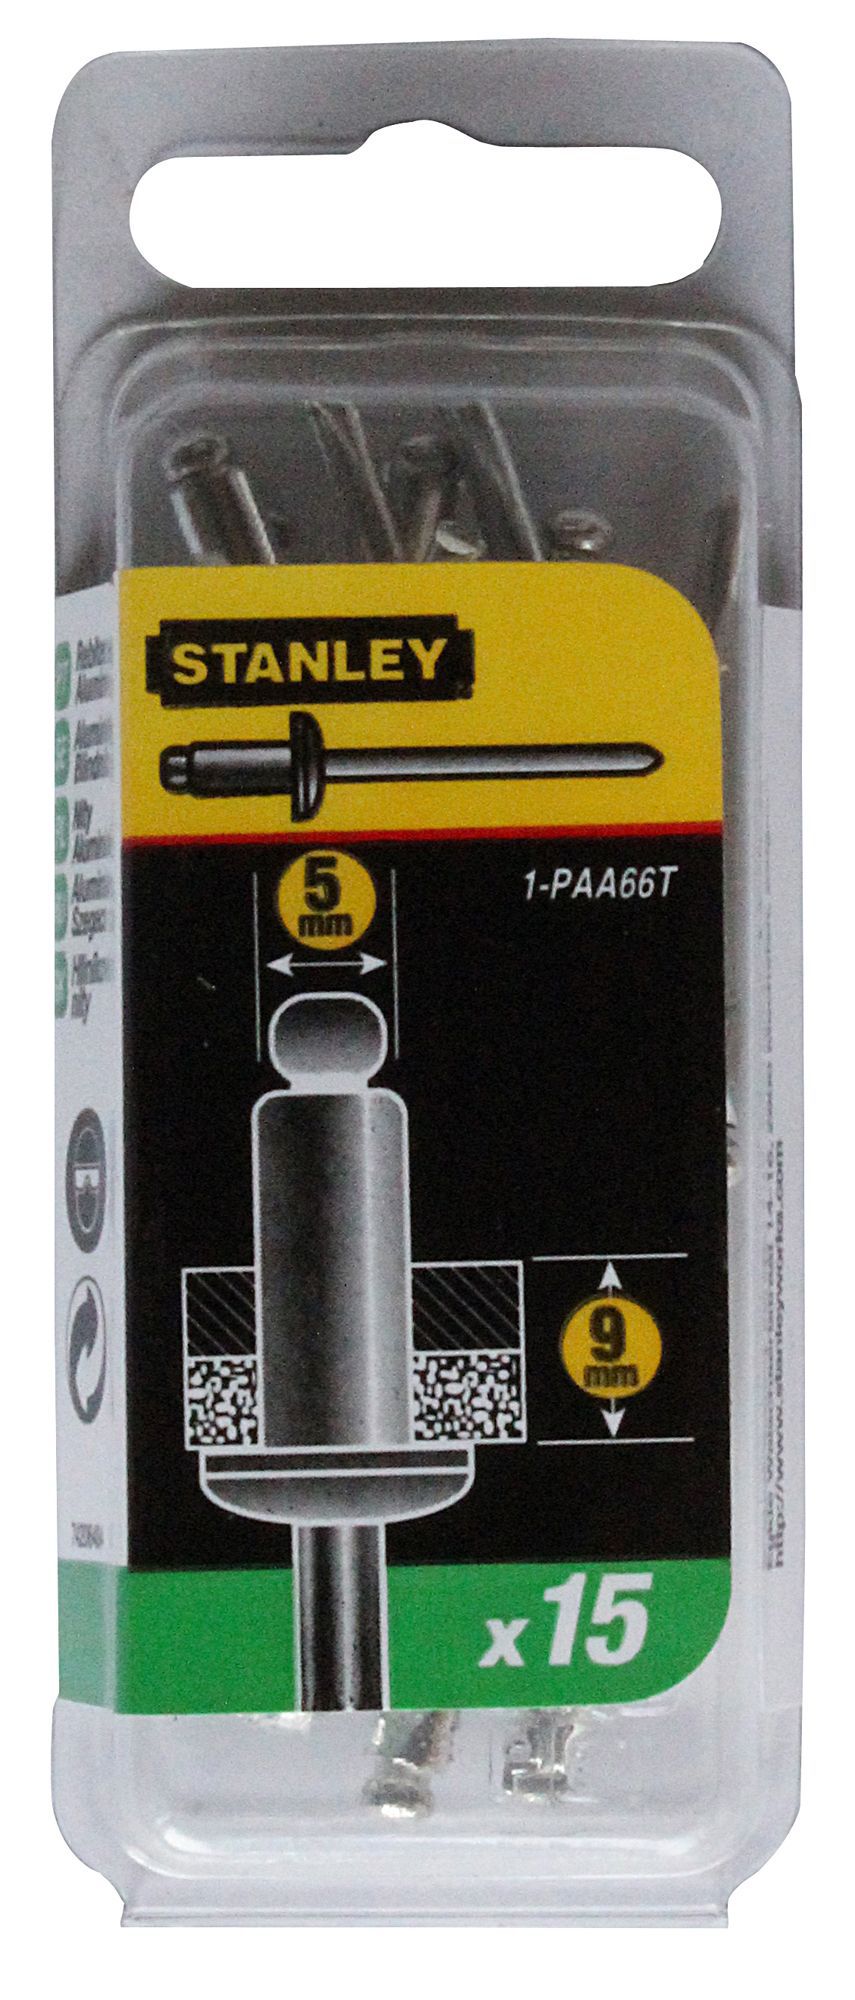 Stanley Staples 1-Paa66T (Dia)4mm (L)12mm 200G, Pack Of 15